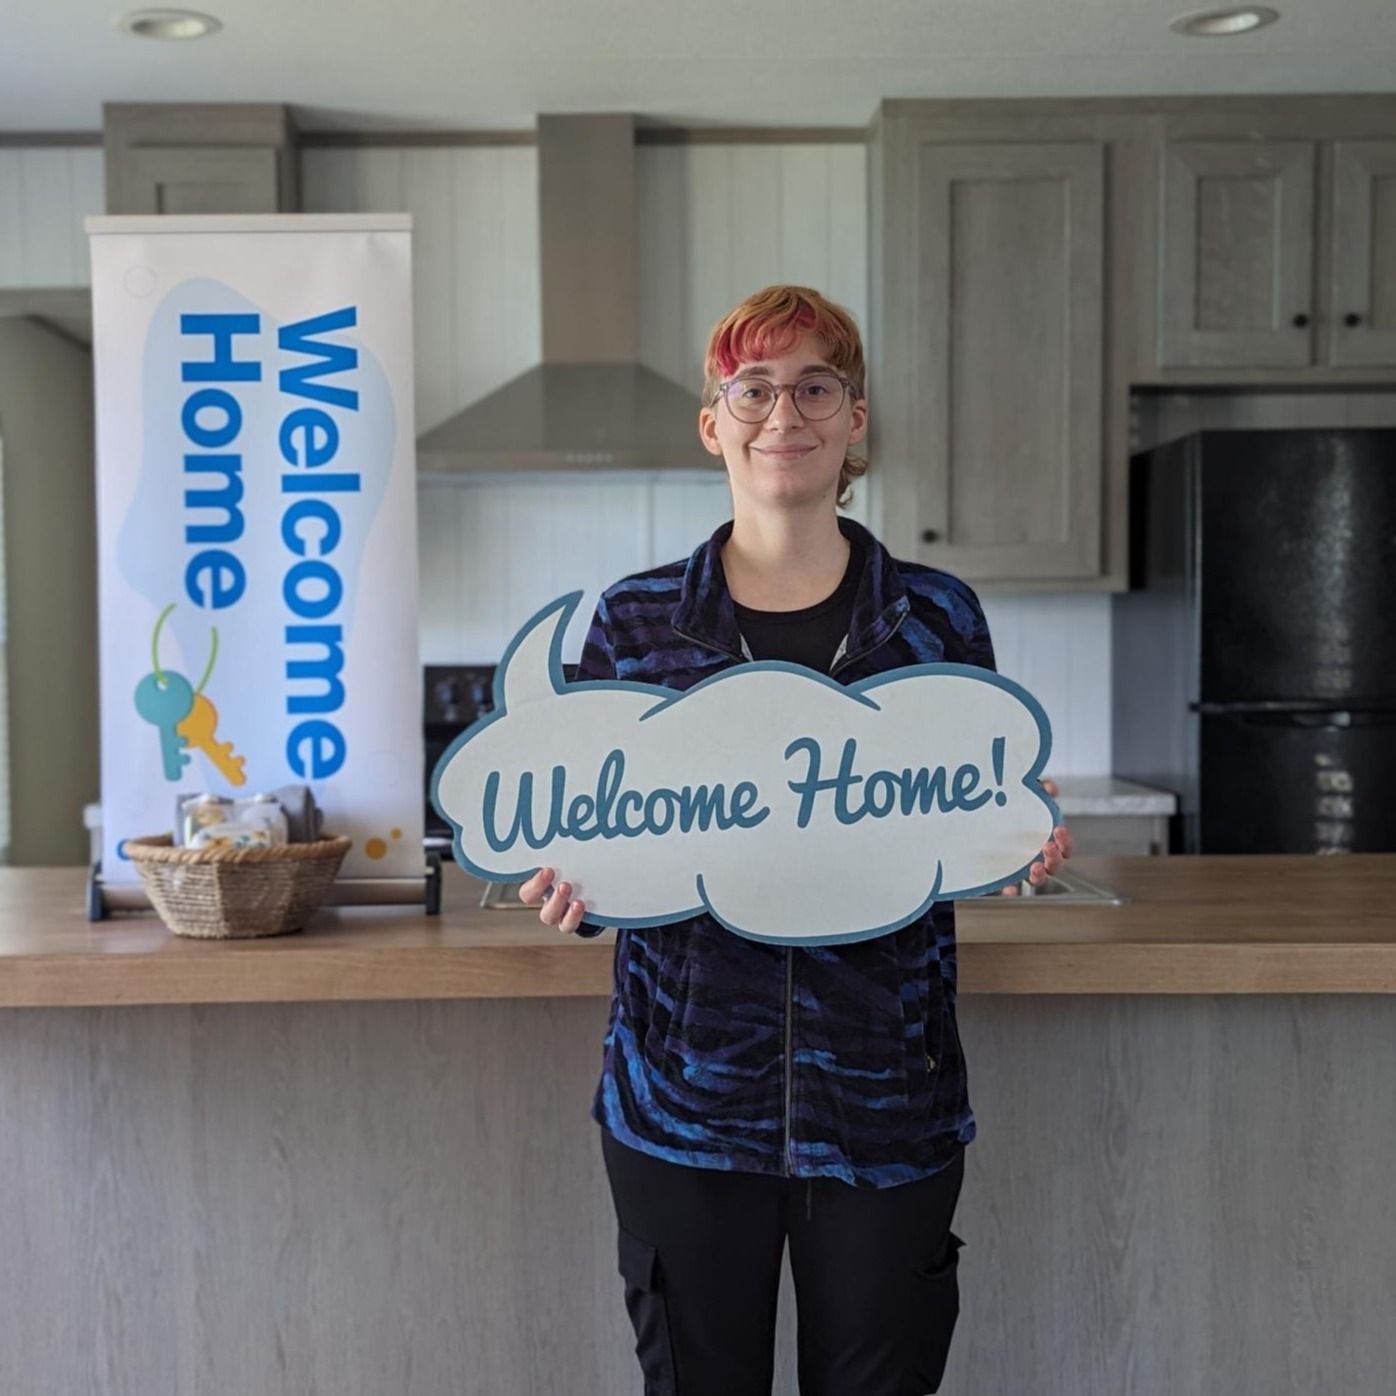 Melodee R. welcome home image